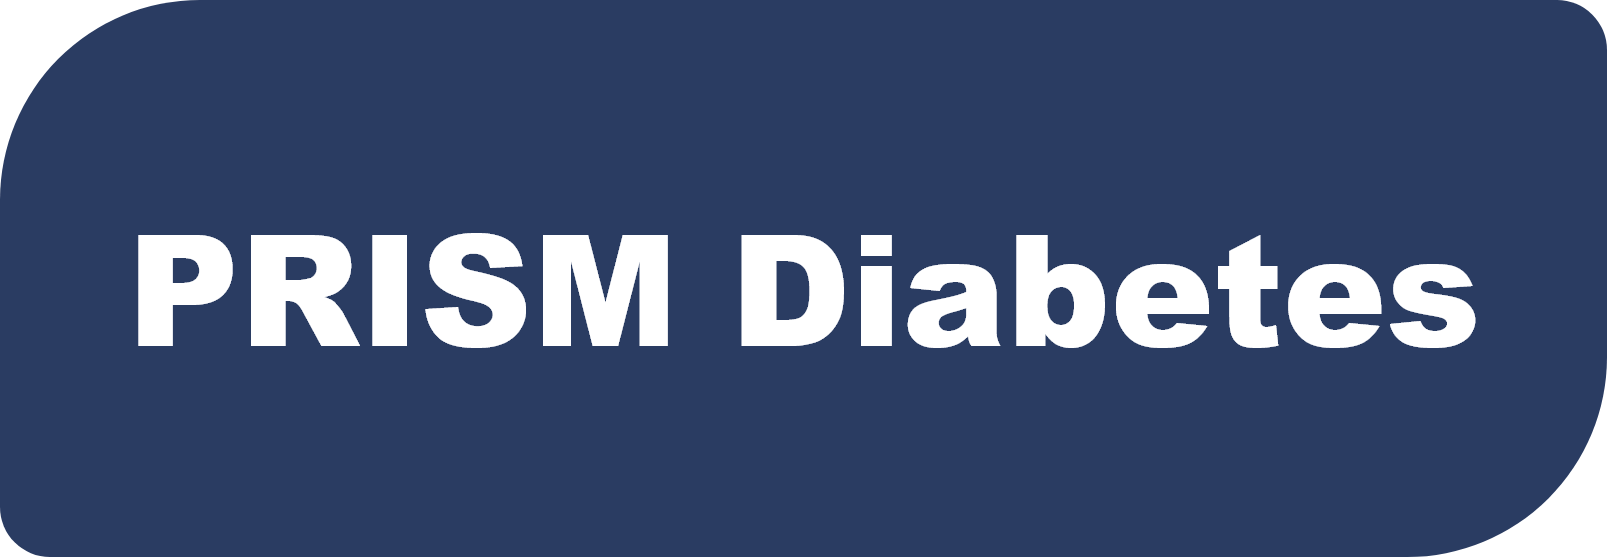 Blue button with text that reads: PRISM Diabetes